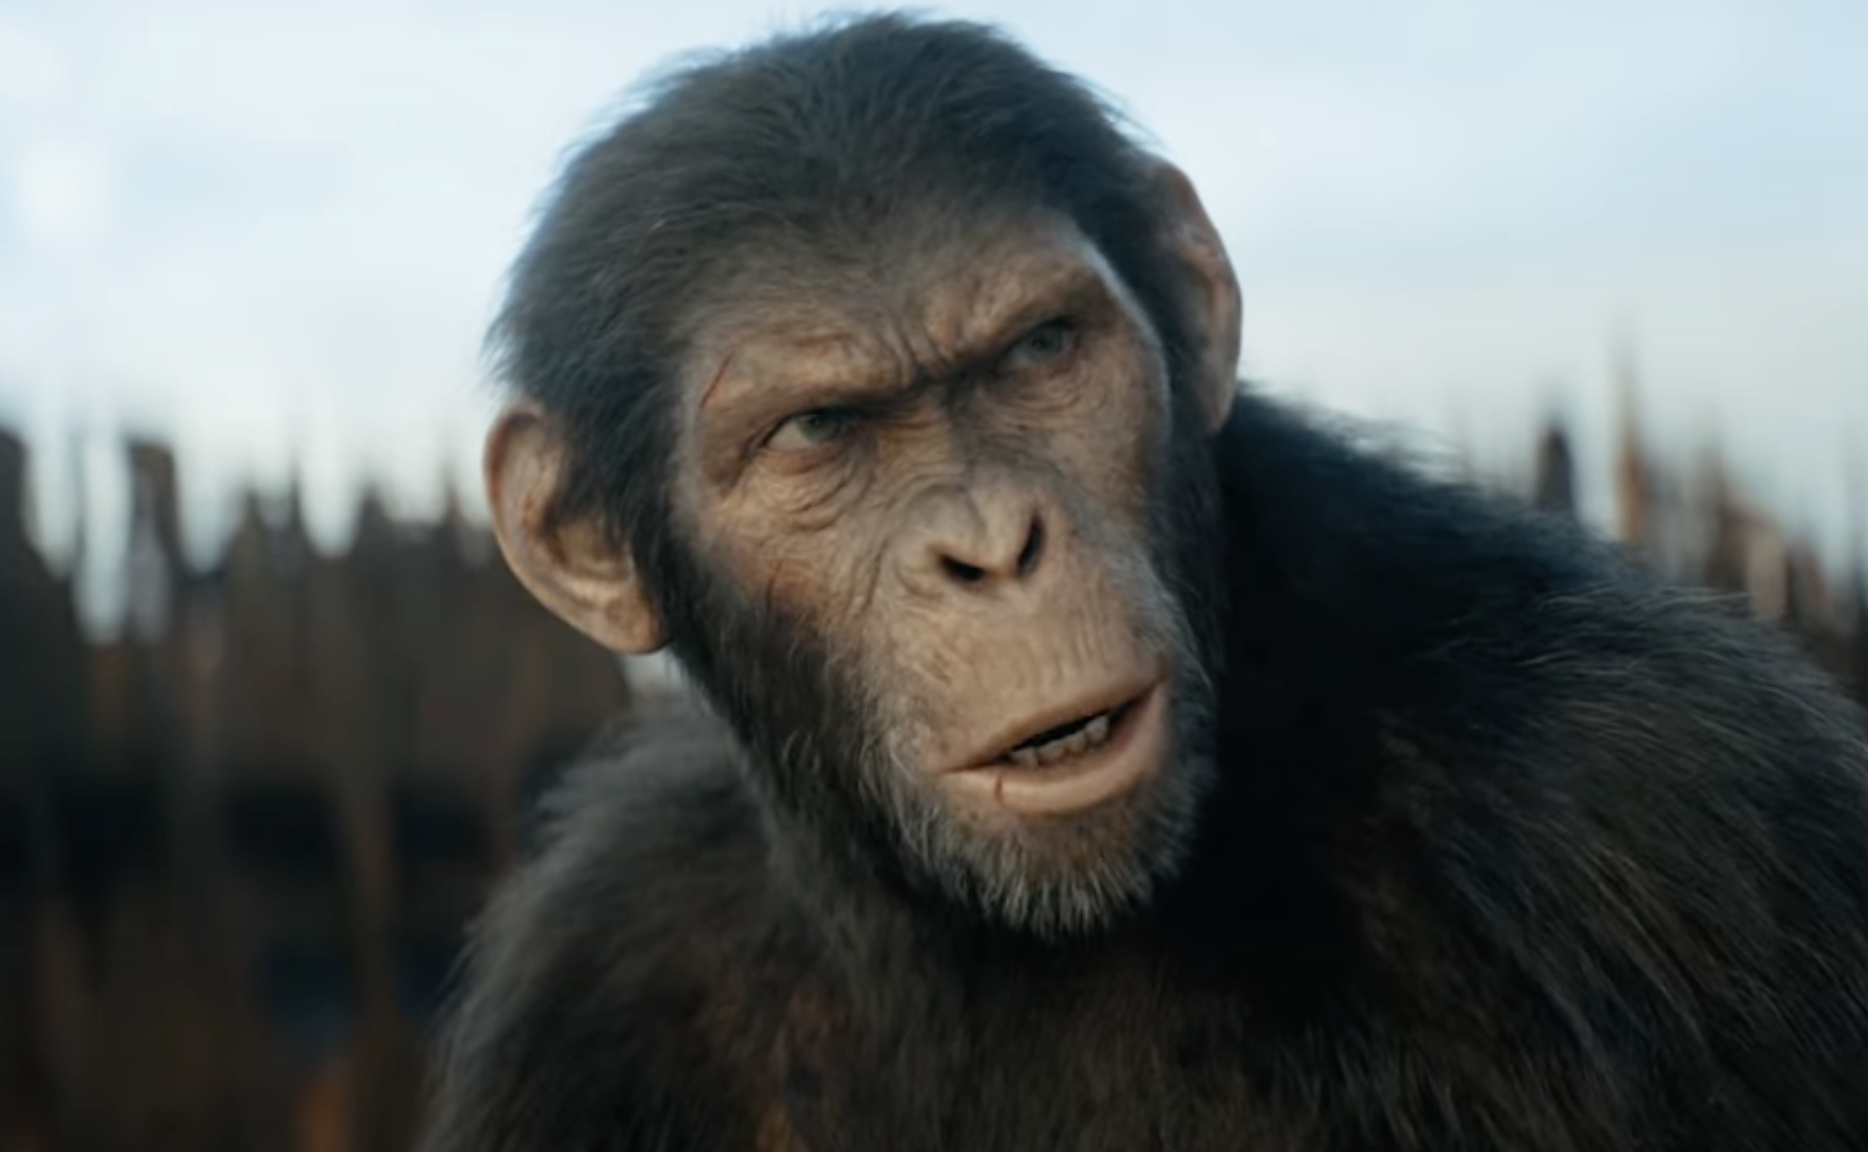 SEE IT: The New Trailer For ‘Kingdom of the Planet of the Apes’ Is Here